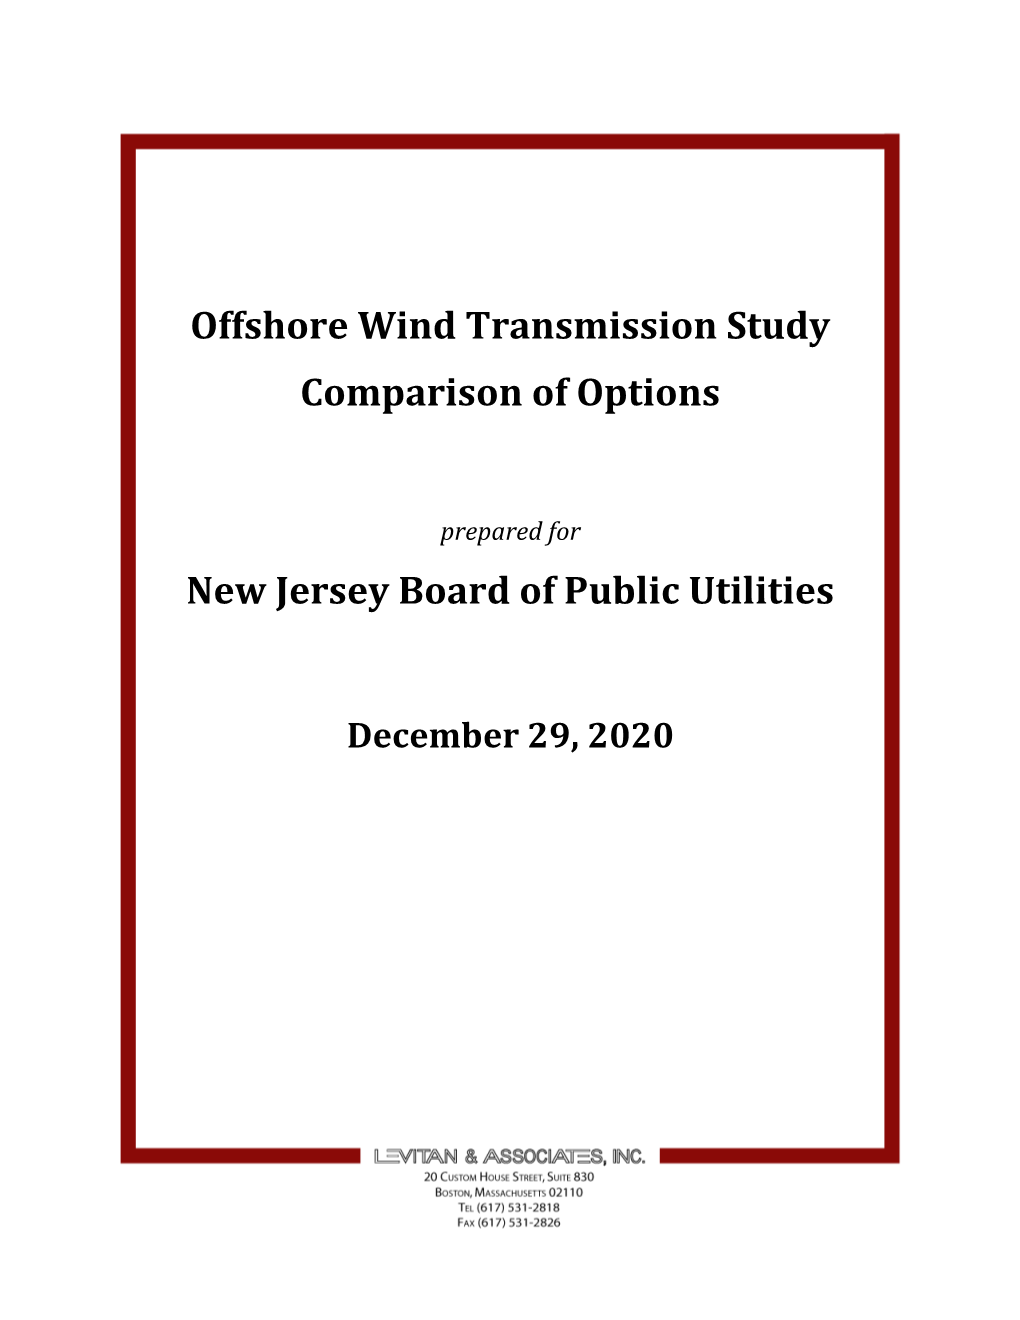 Offshore Wind Transmission Study Comparison of Options